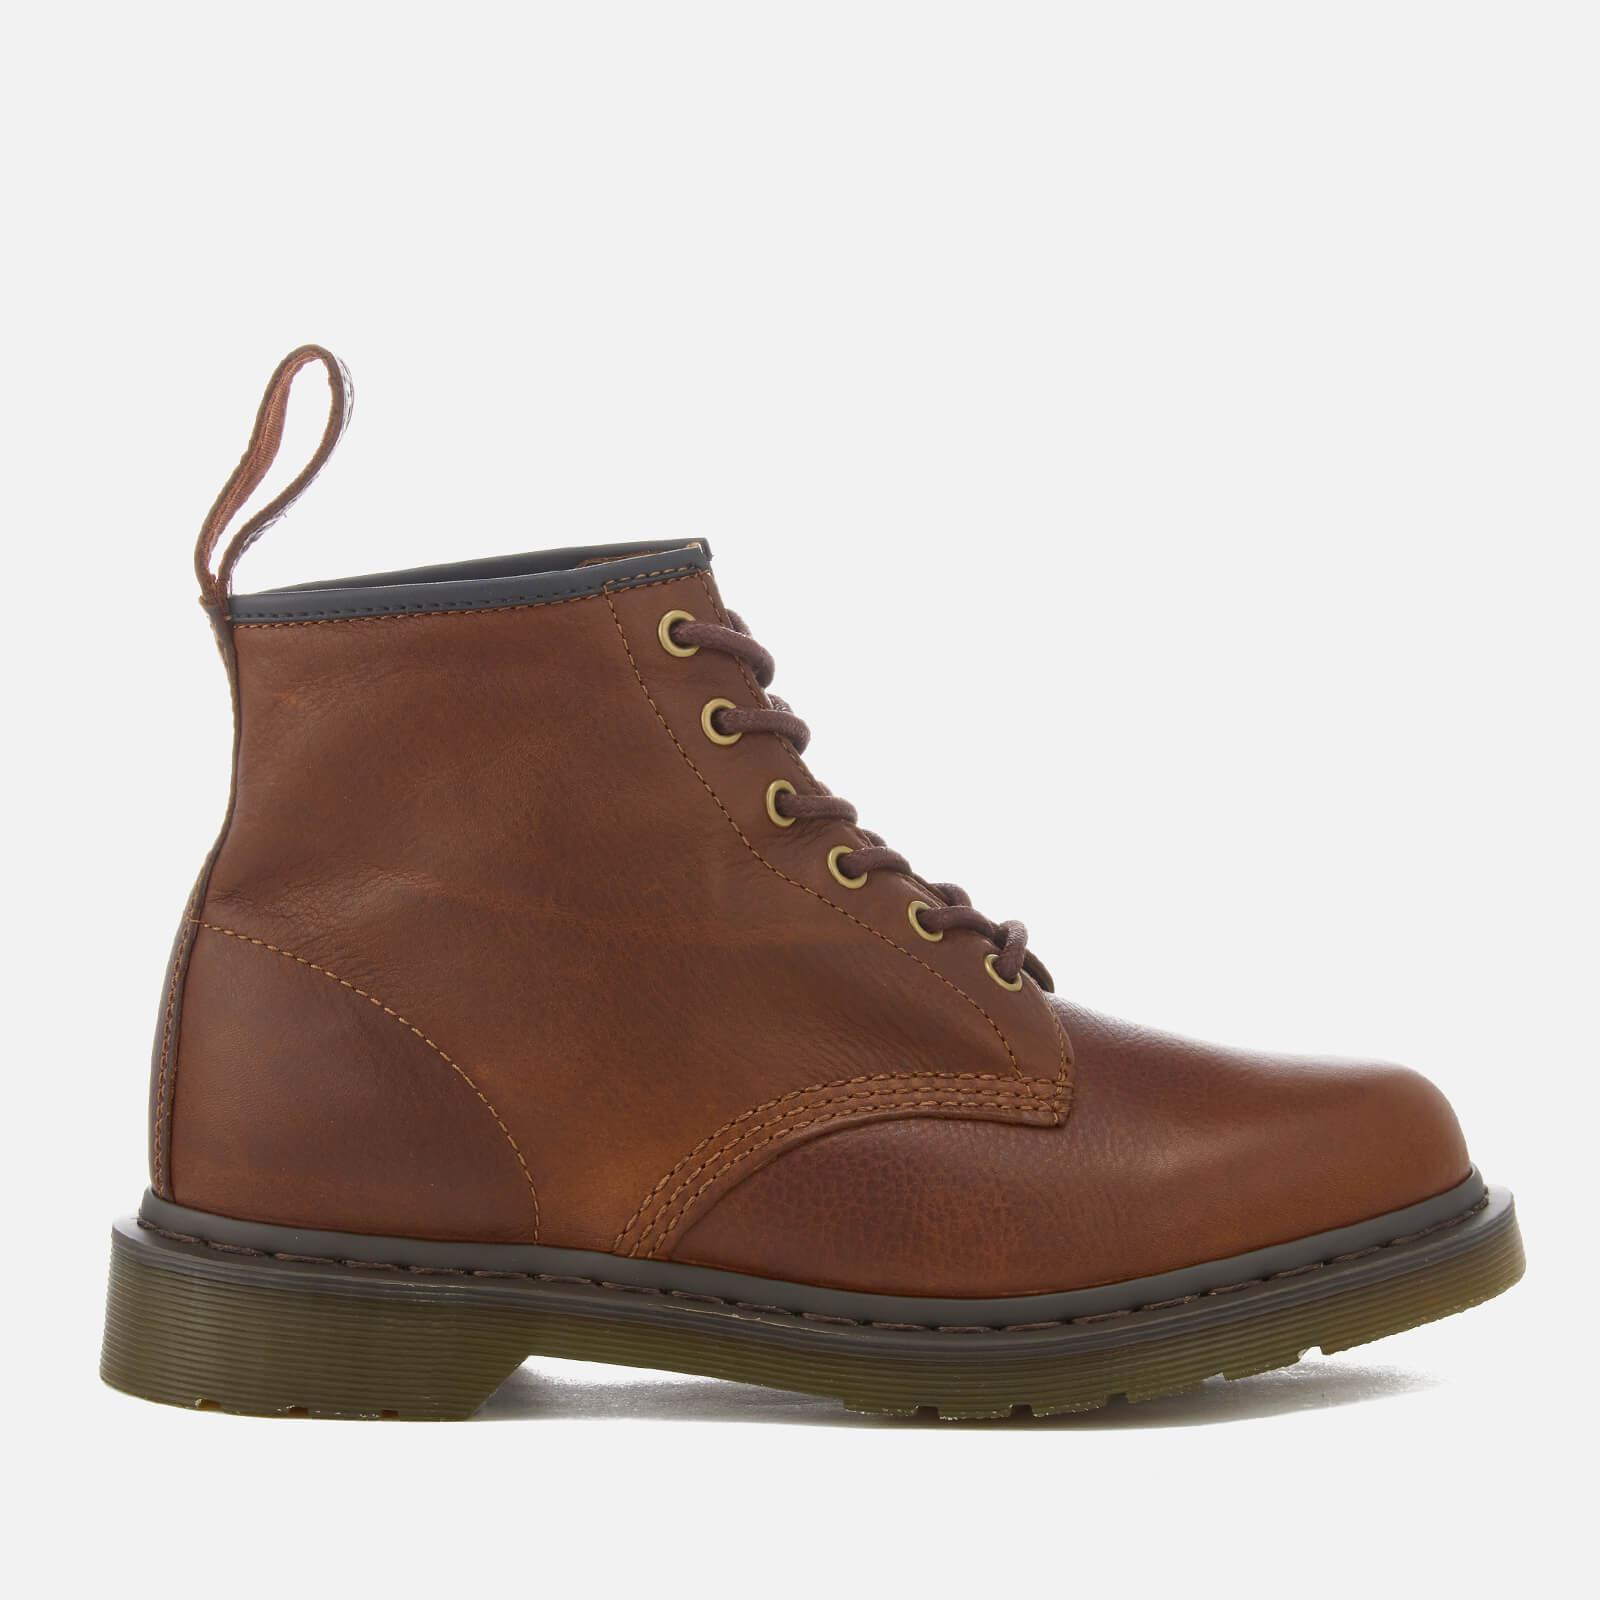 Dr. Martens 101 Harvest Leather 6-eye Lace Up Boots in Tan (Brown) for ...